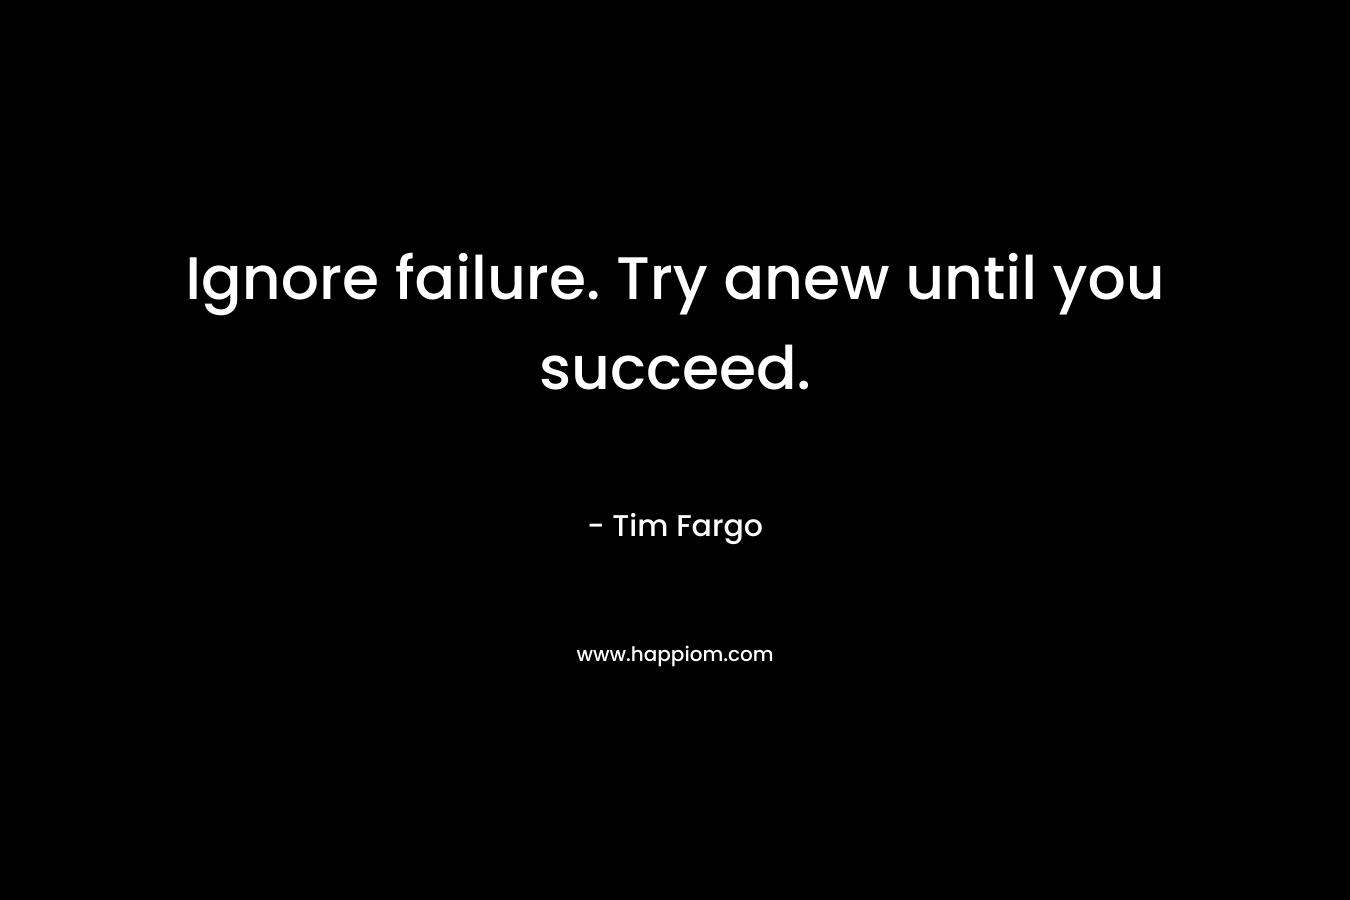 Ignore failure. Try anew until you succeed.